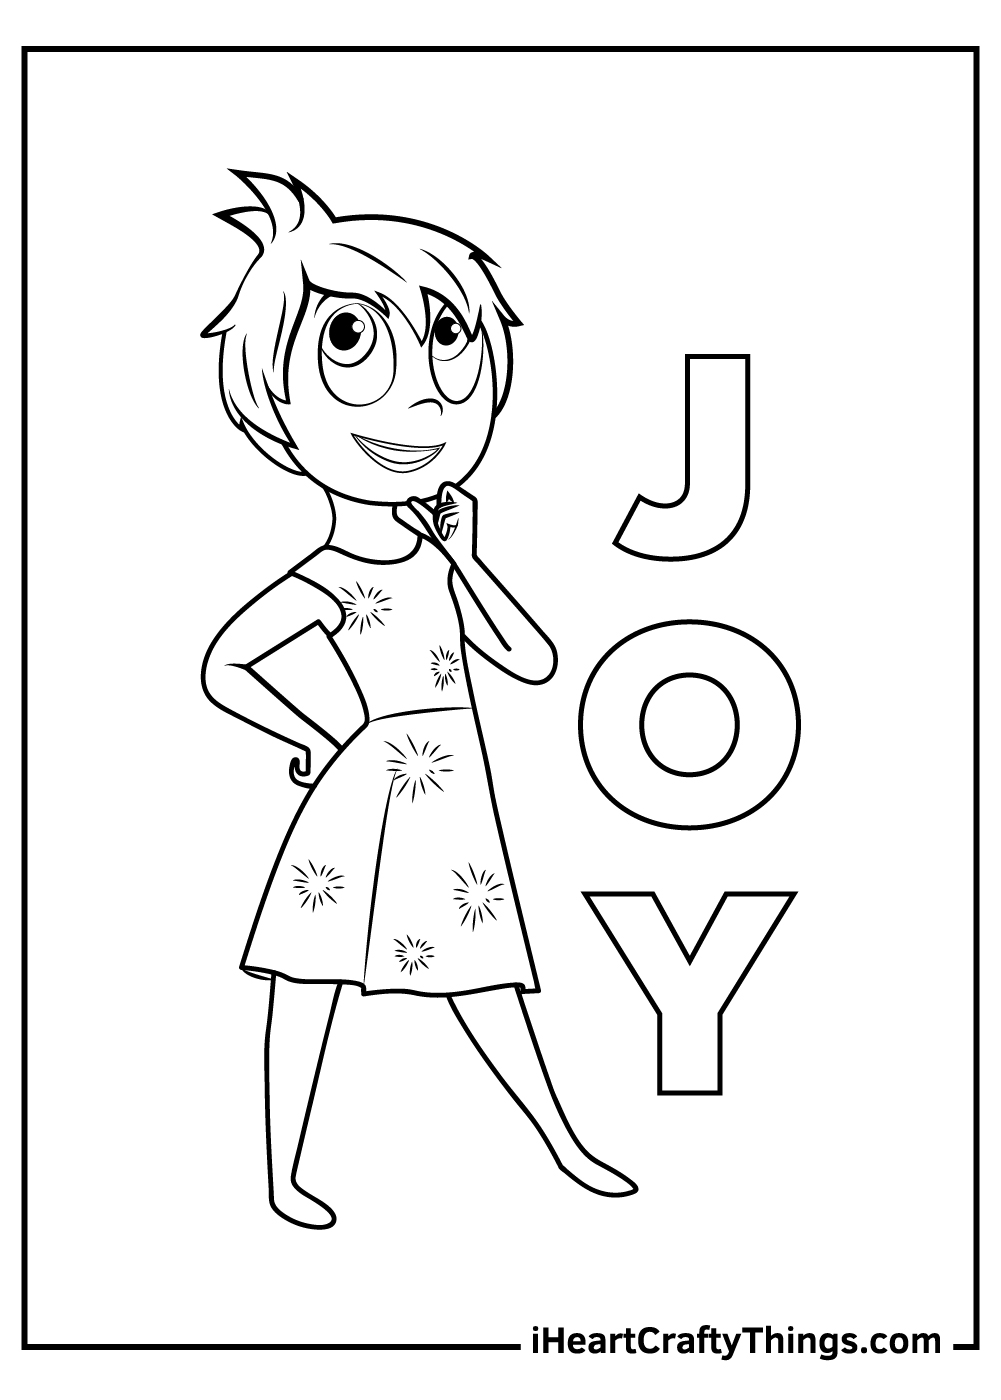 Inside out coloring pages free printables